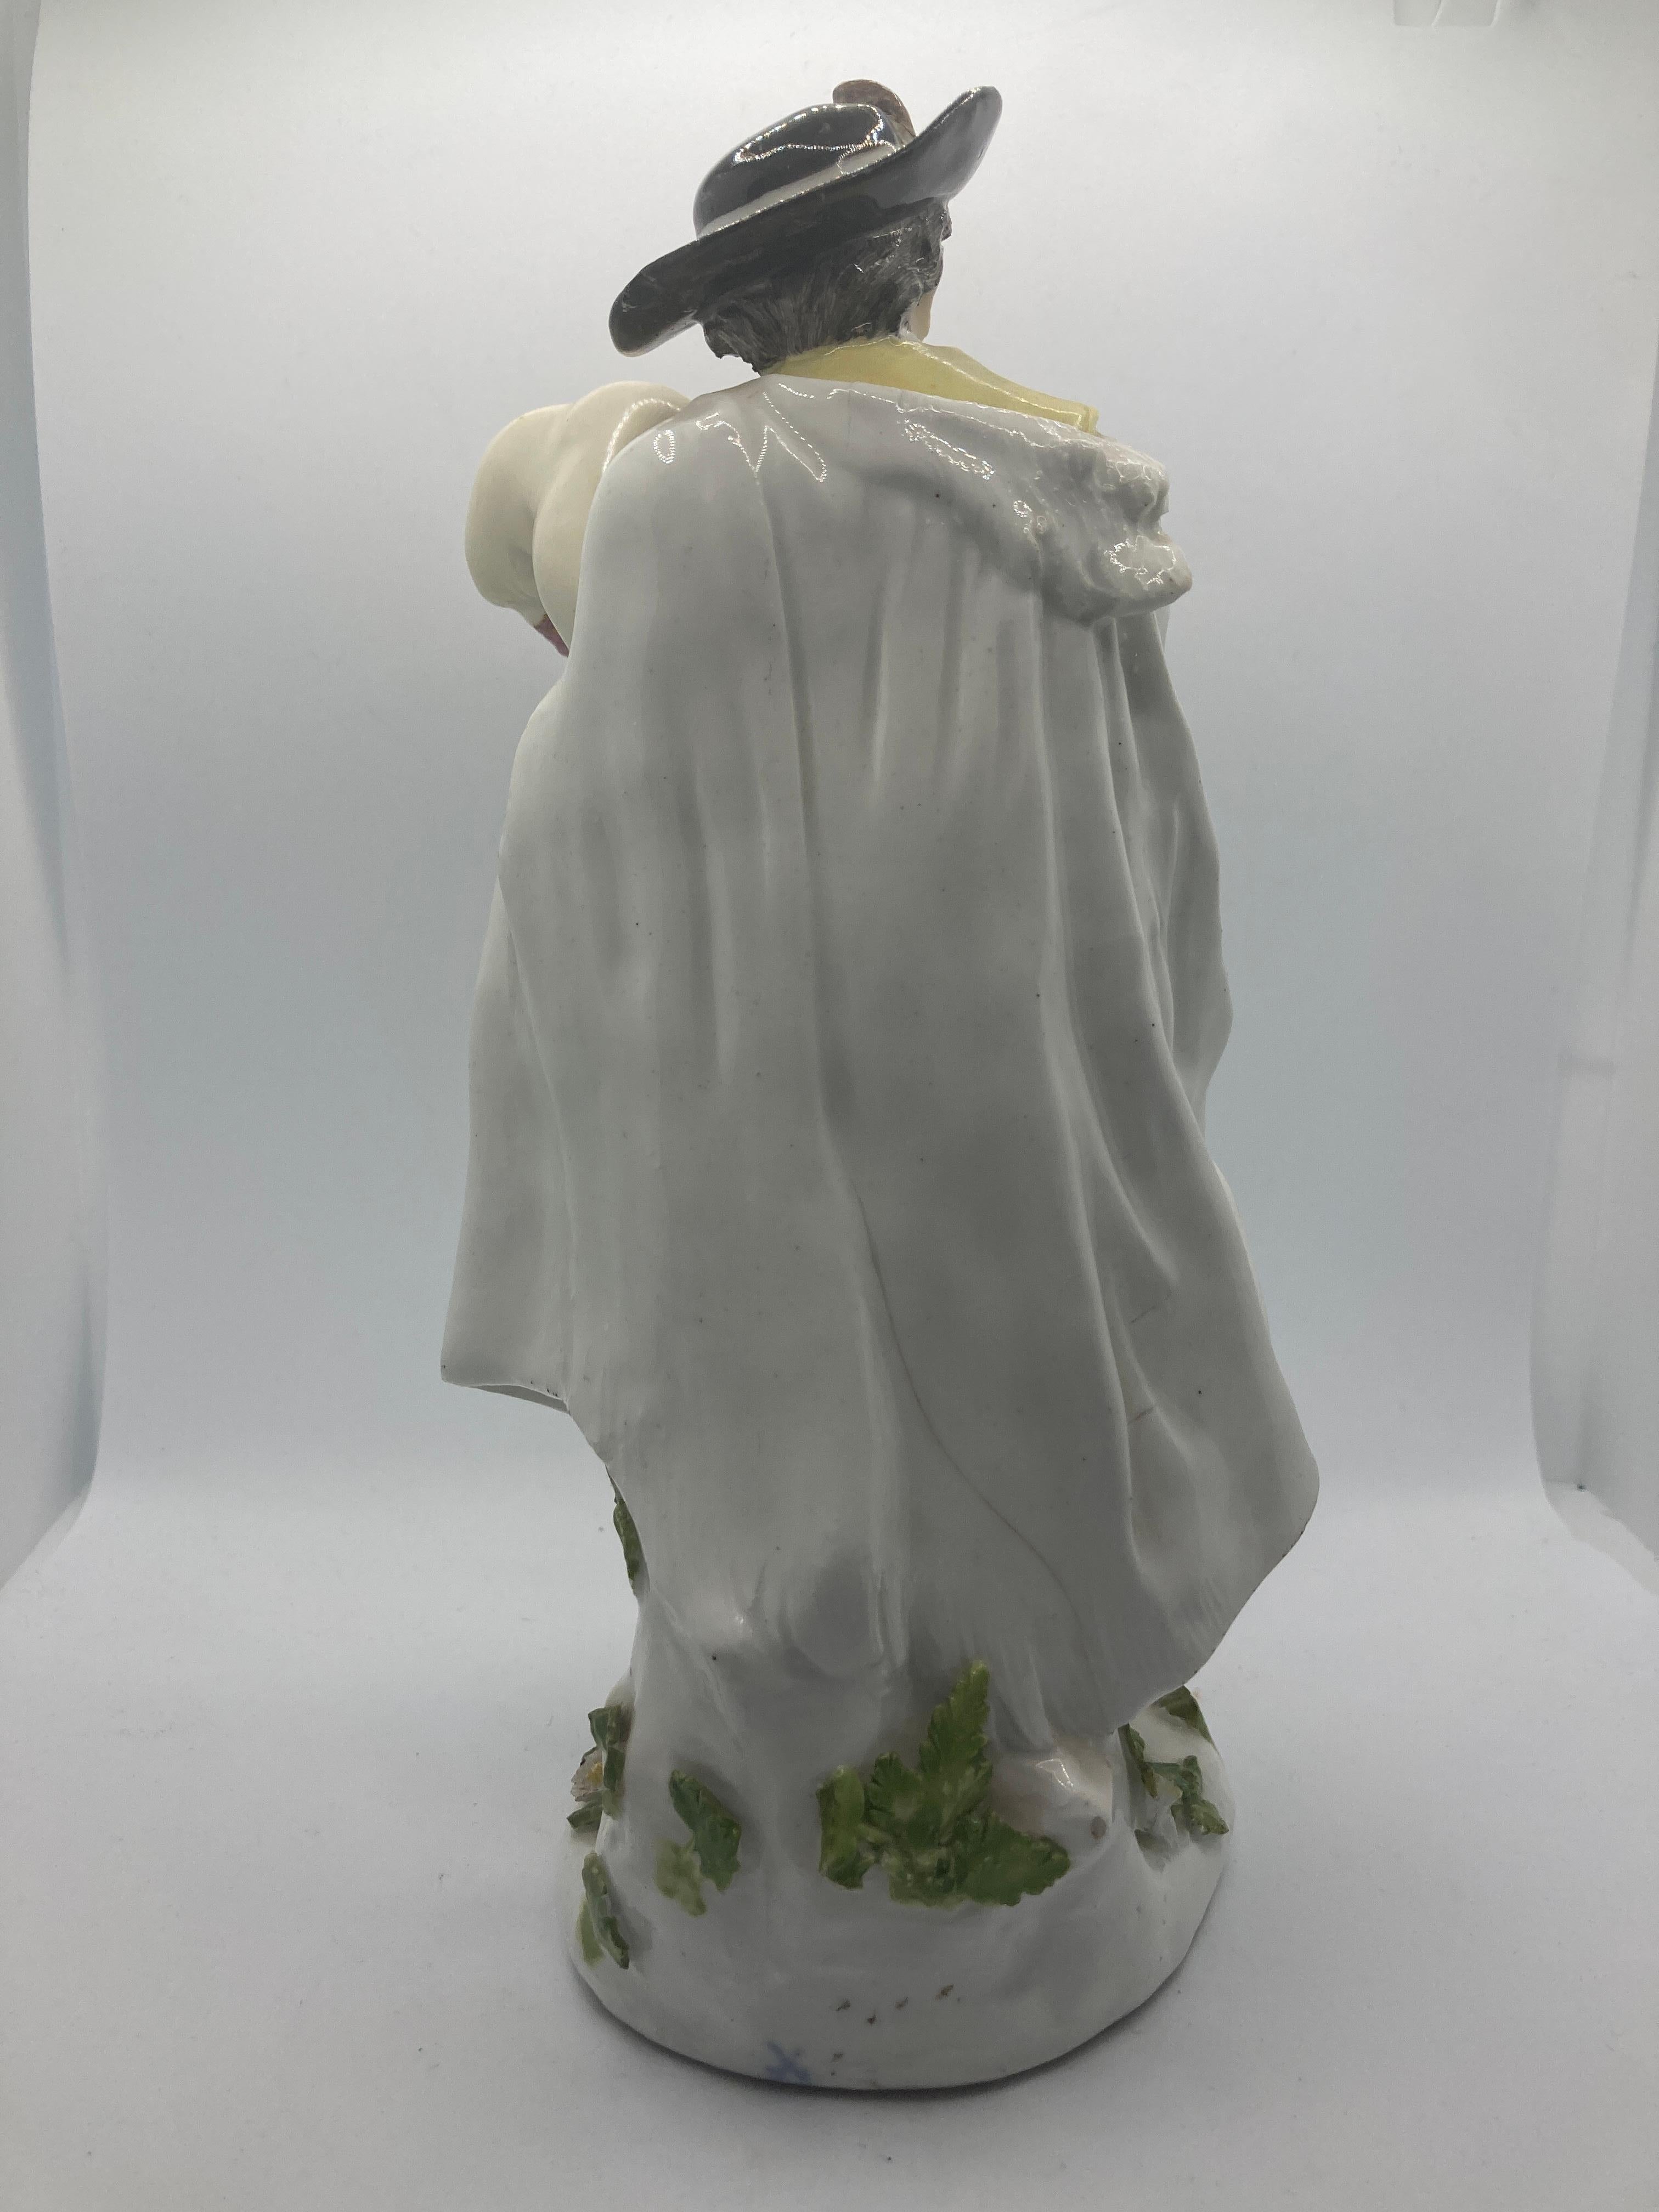 Hand-Crafted 18th Century Meissen Porcelain Figure, 'Piedmontese Bagpiper' For Sale